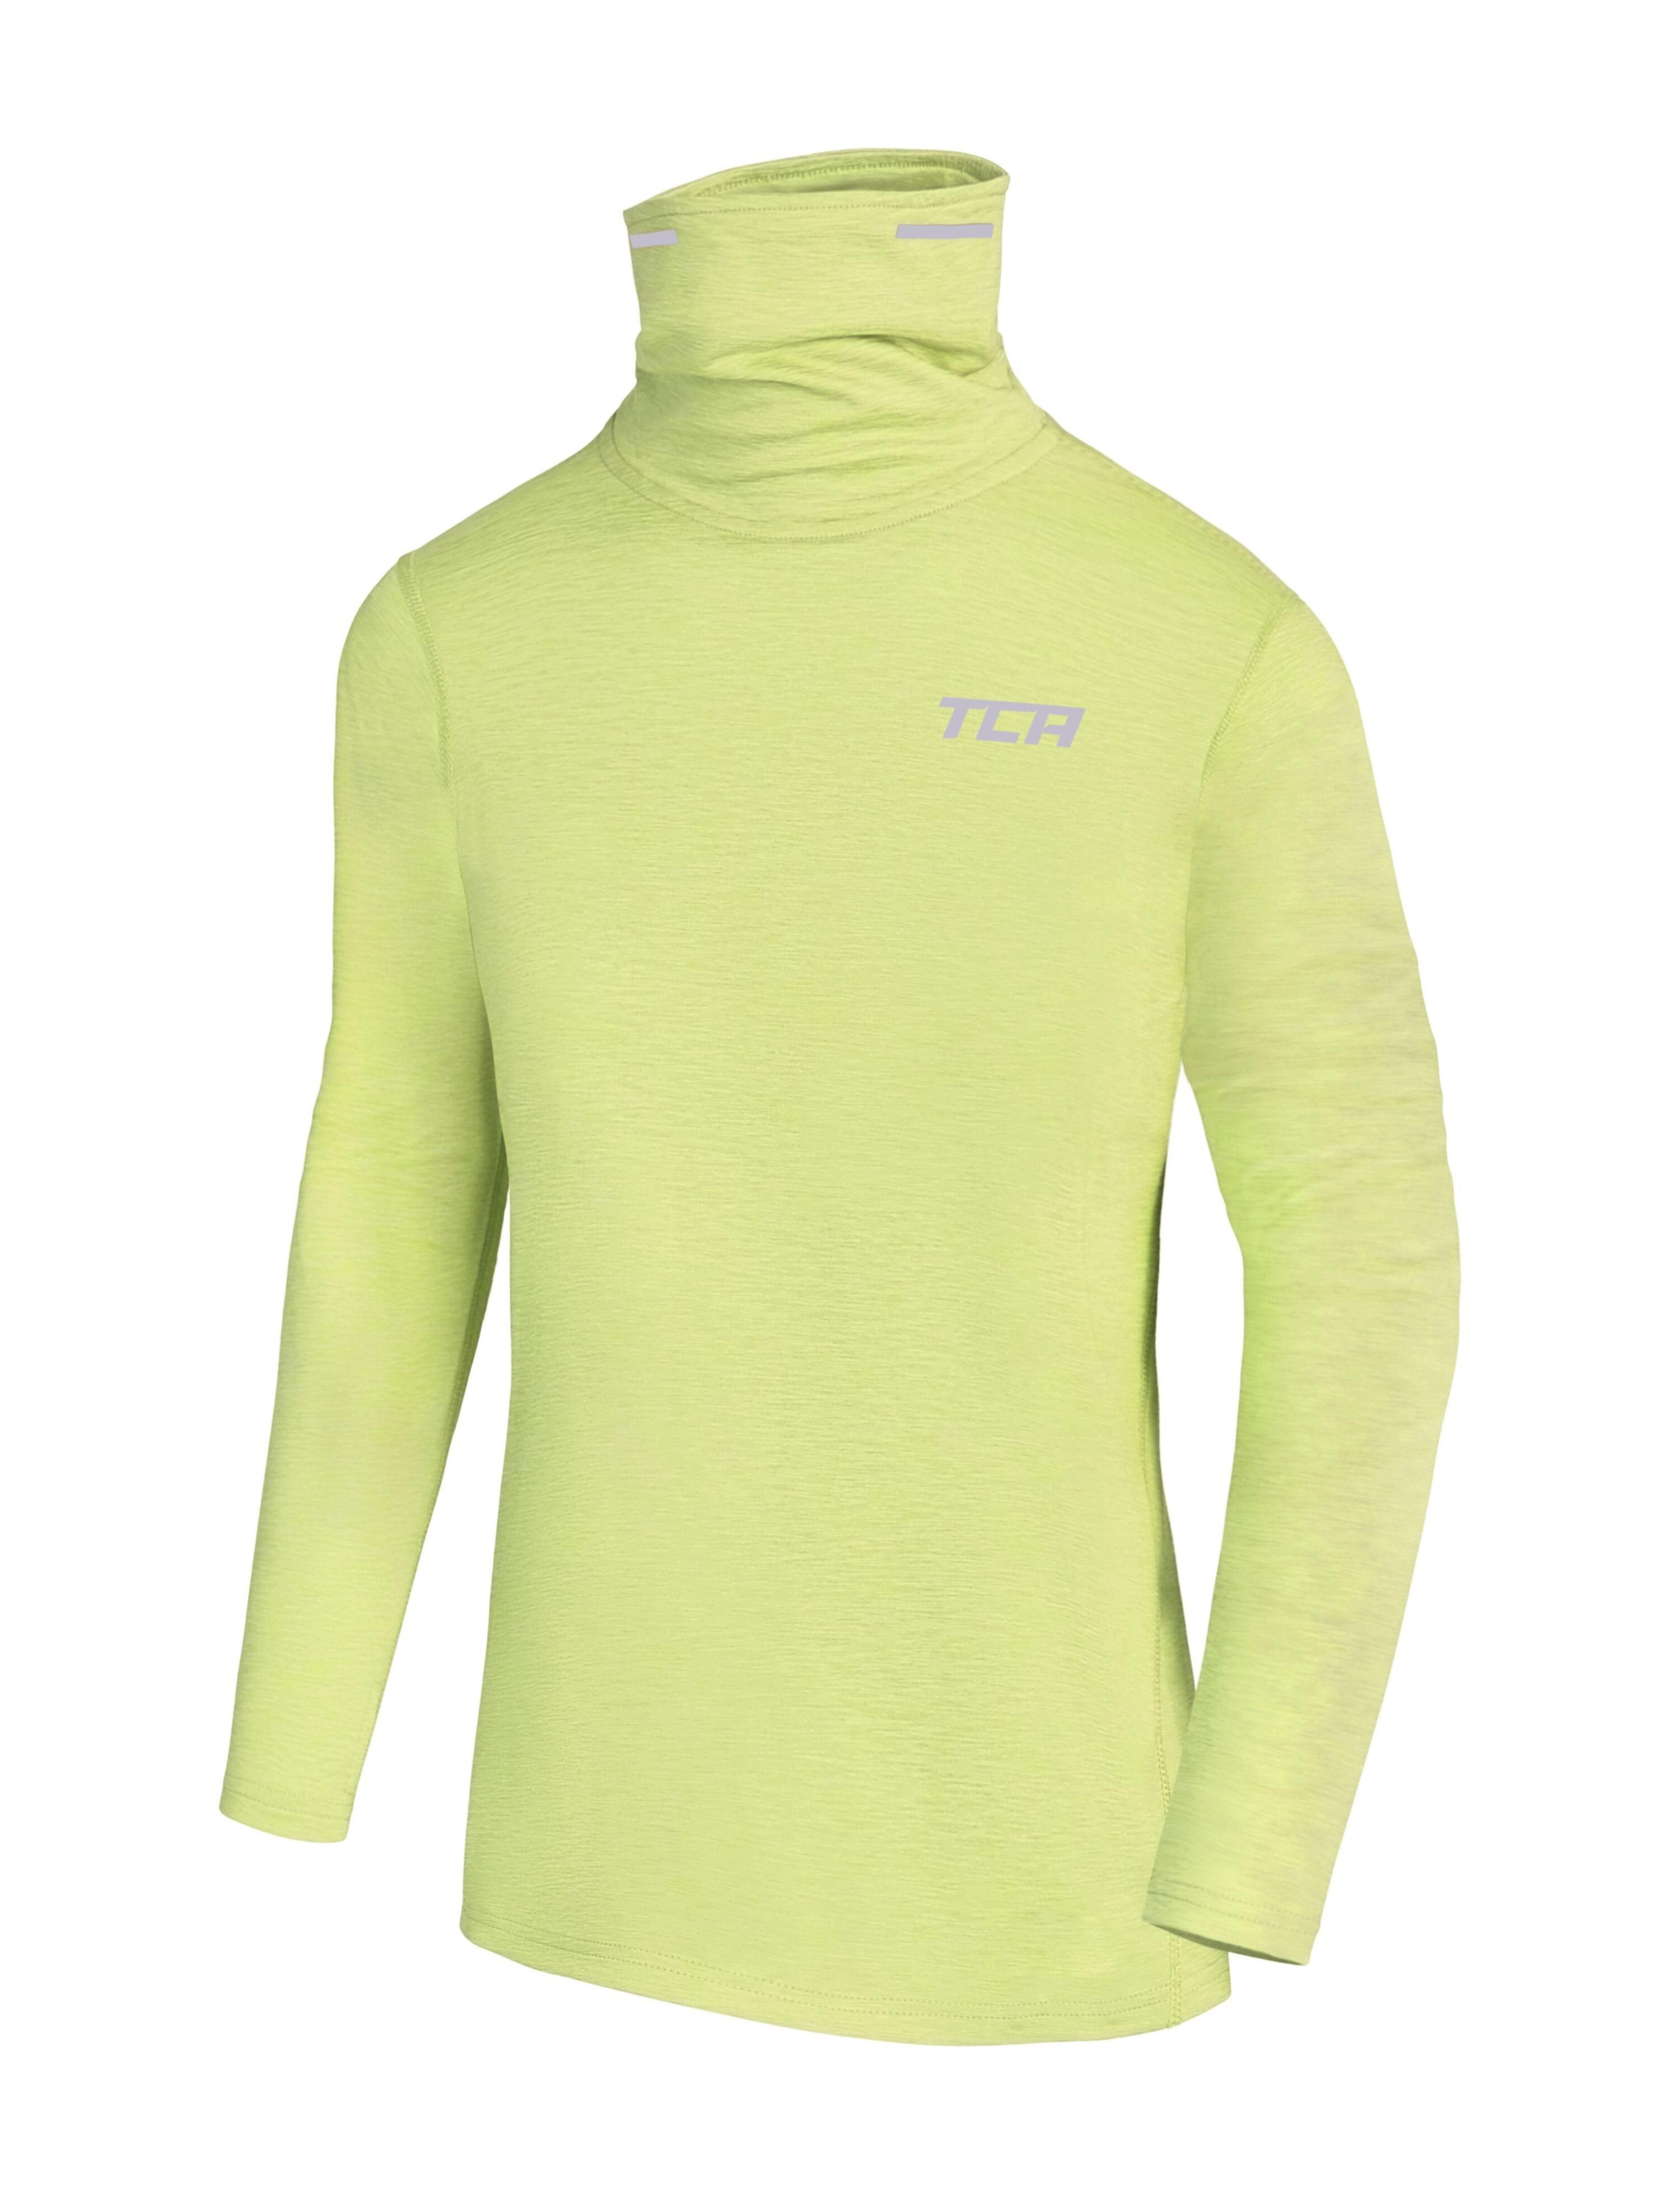 TCA Boy’s Thermal Funnel Neck Top - Lime Punch